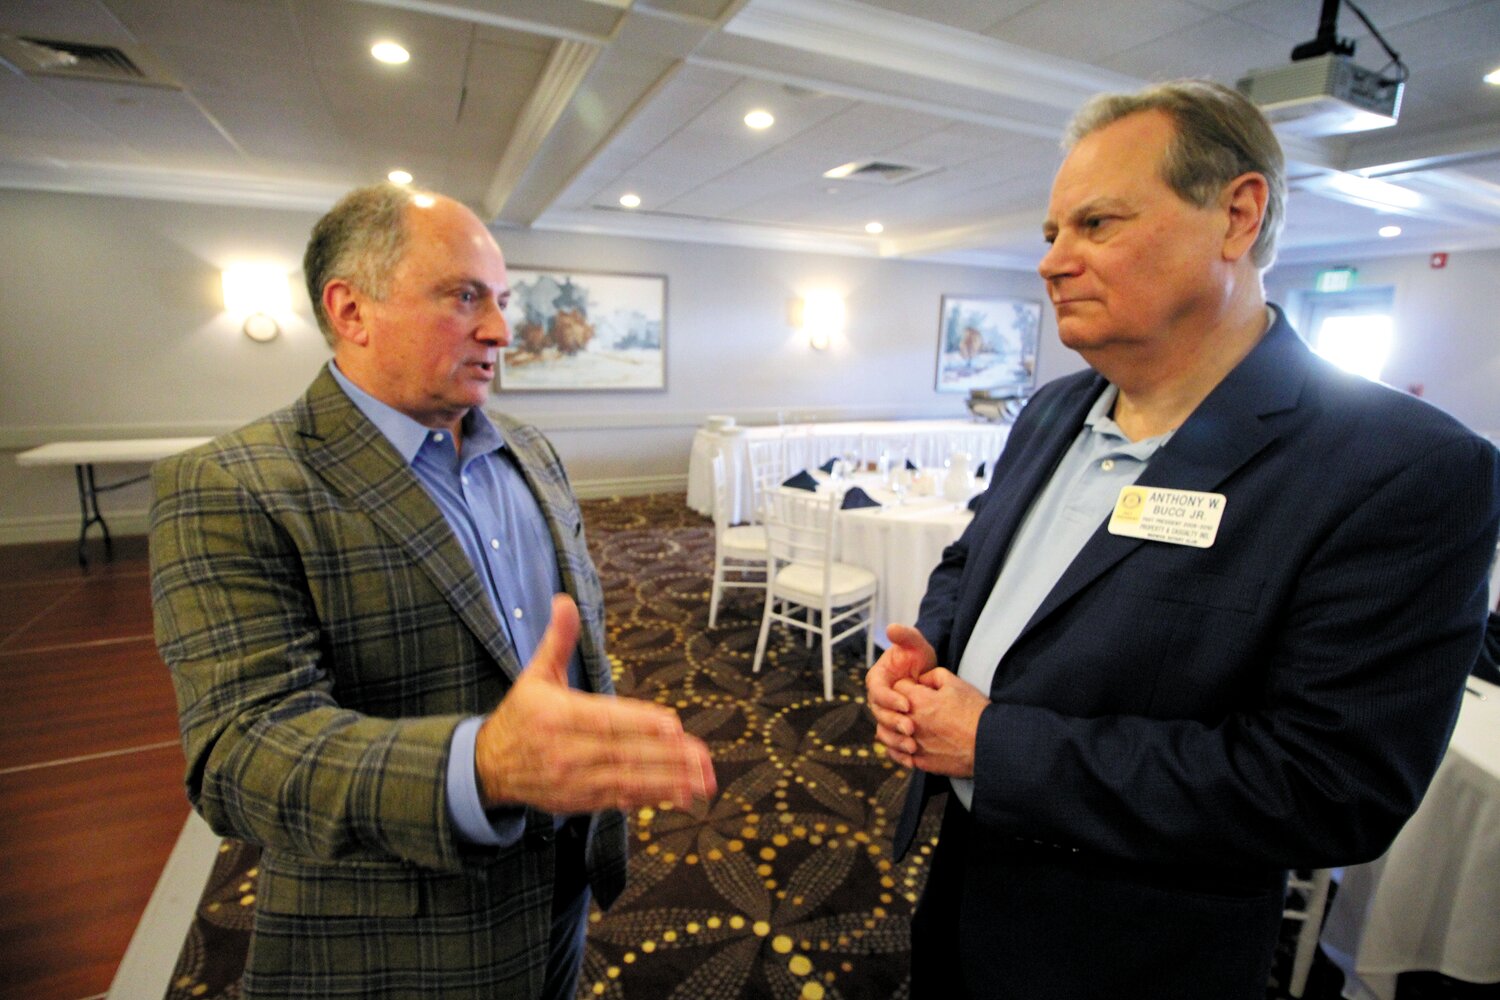 EMPTY-HANDED: Ken Block, left, talks with Warwick Rotary Club member Tony Bucci. He said after extensive research of voting data he concluded there was not a sufficient amount of voter fraud to alter the outcome of the 2020 Presidential election. (Warwick Beacon photo)